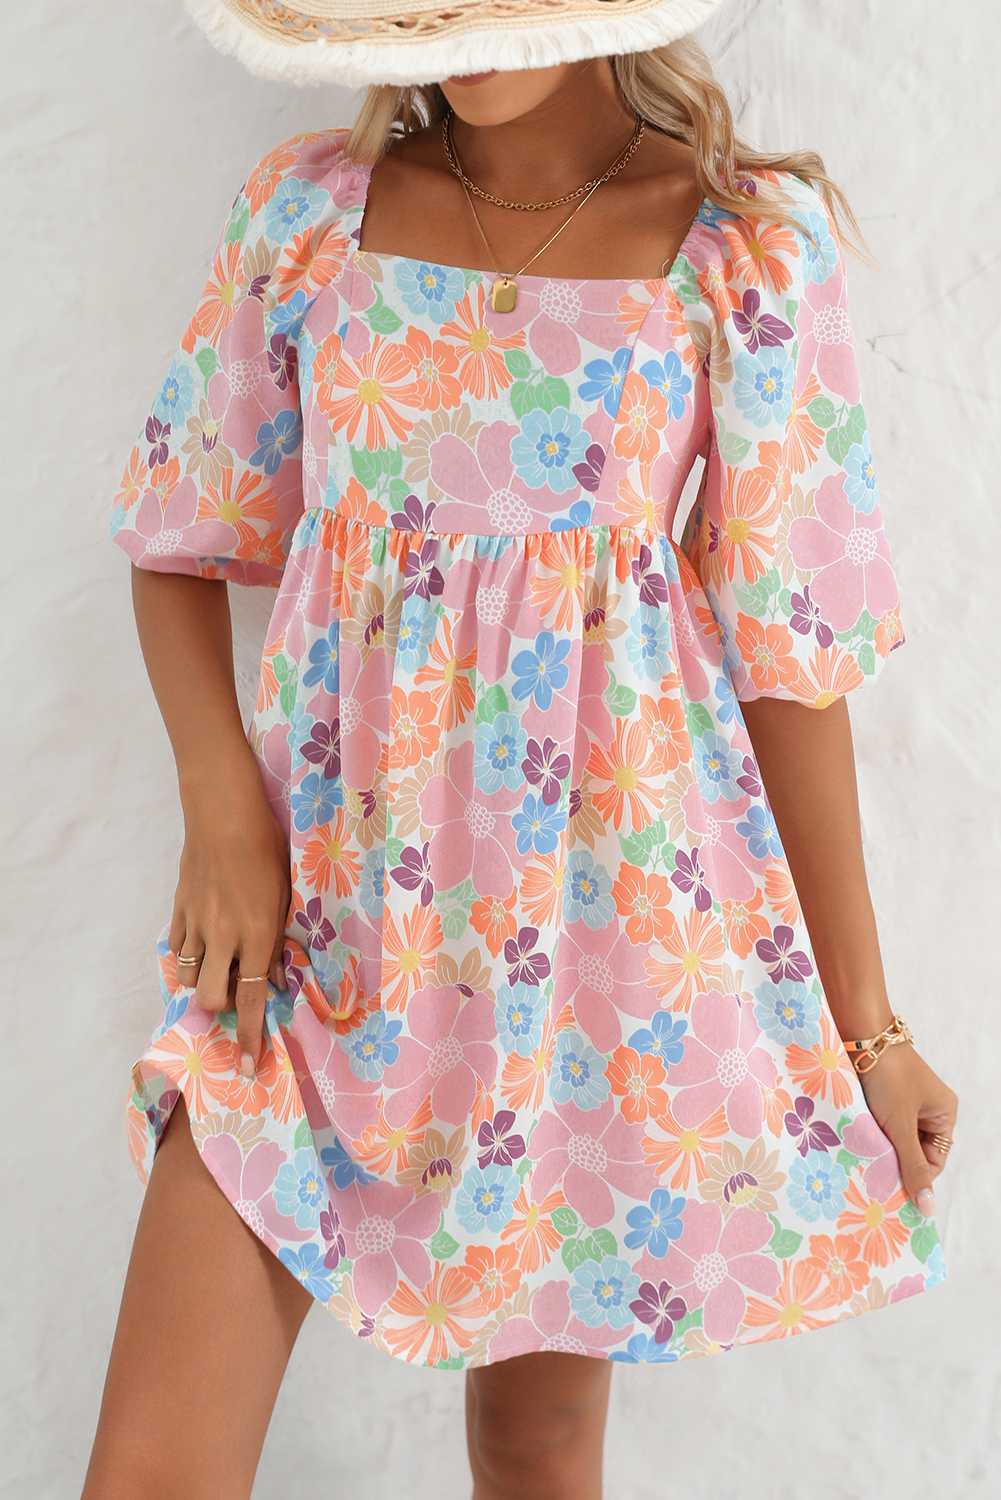 Shewin Wholesale Clothes Pink SUMMER Floral Square Neck Puff Sleeve Babydoll DRESS